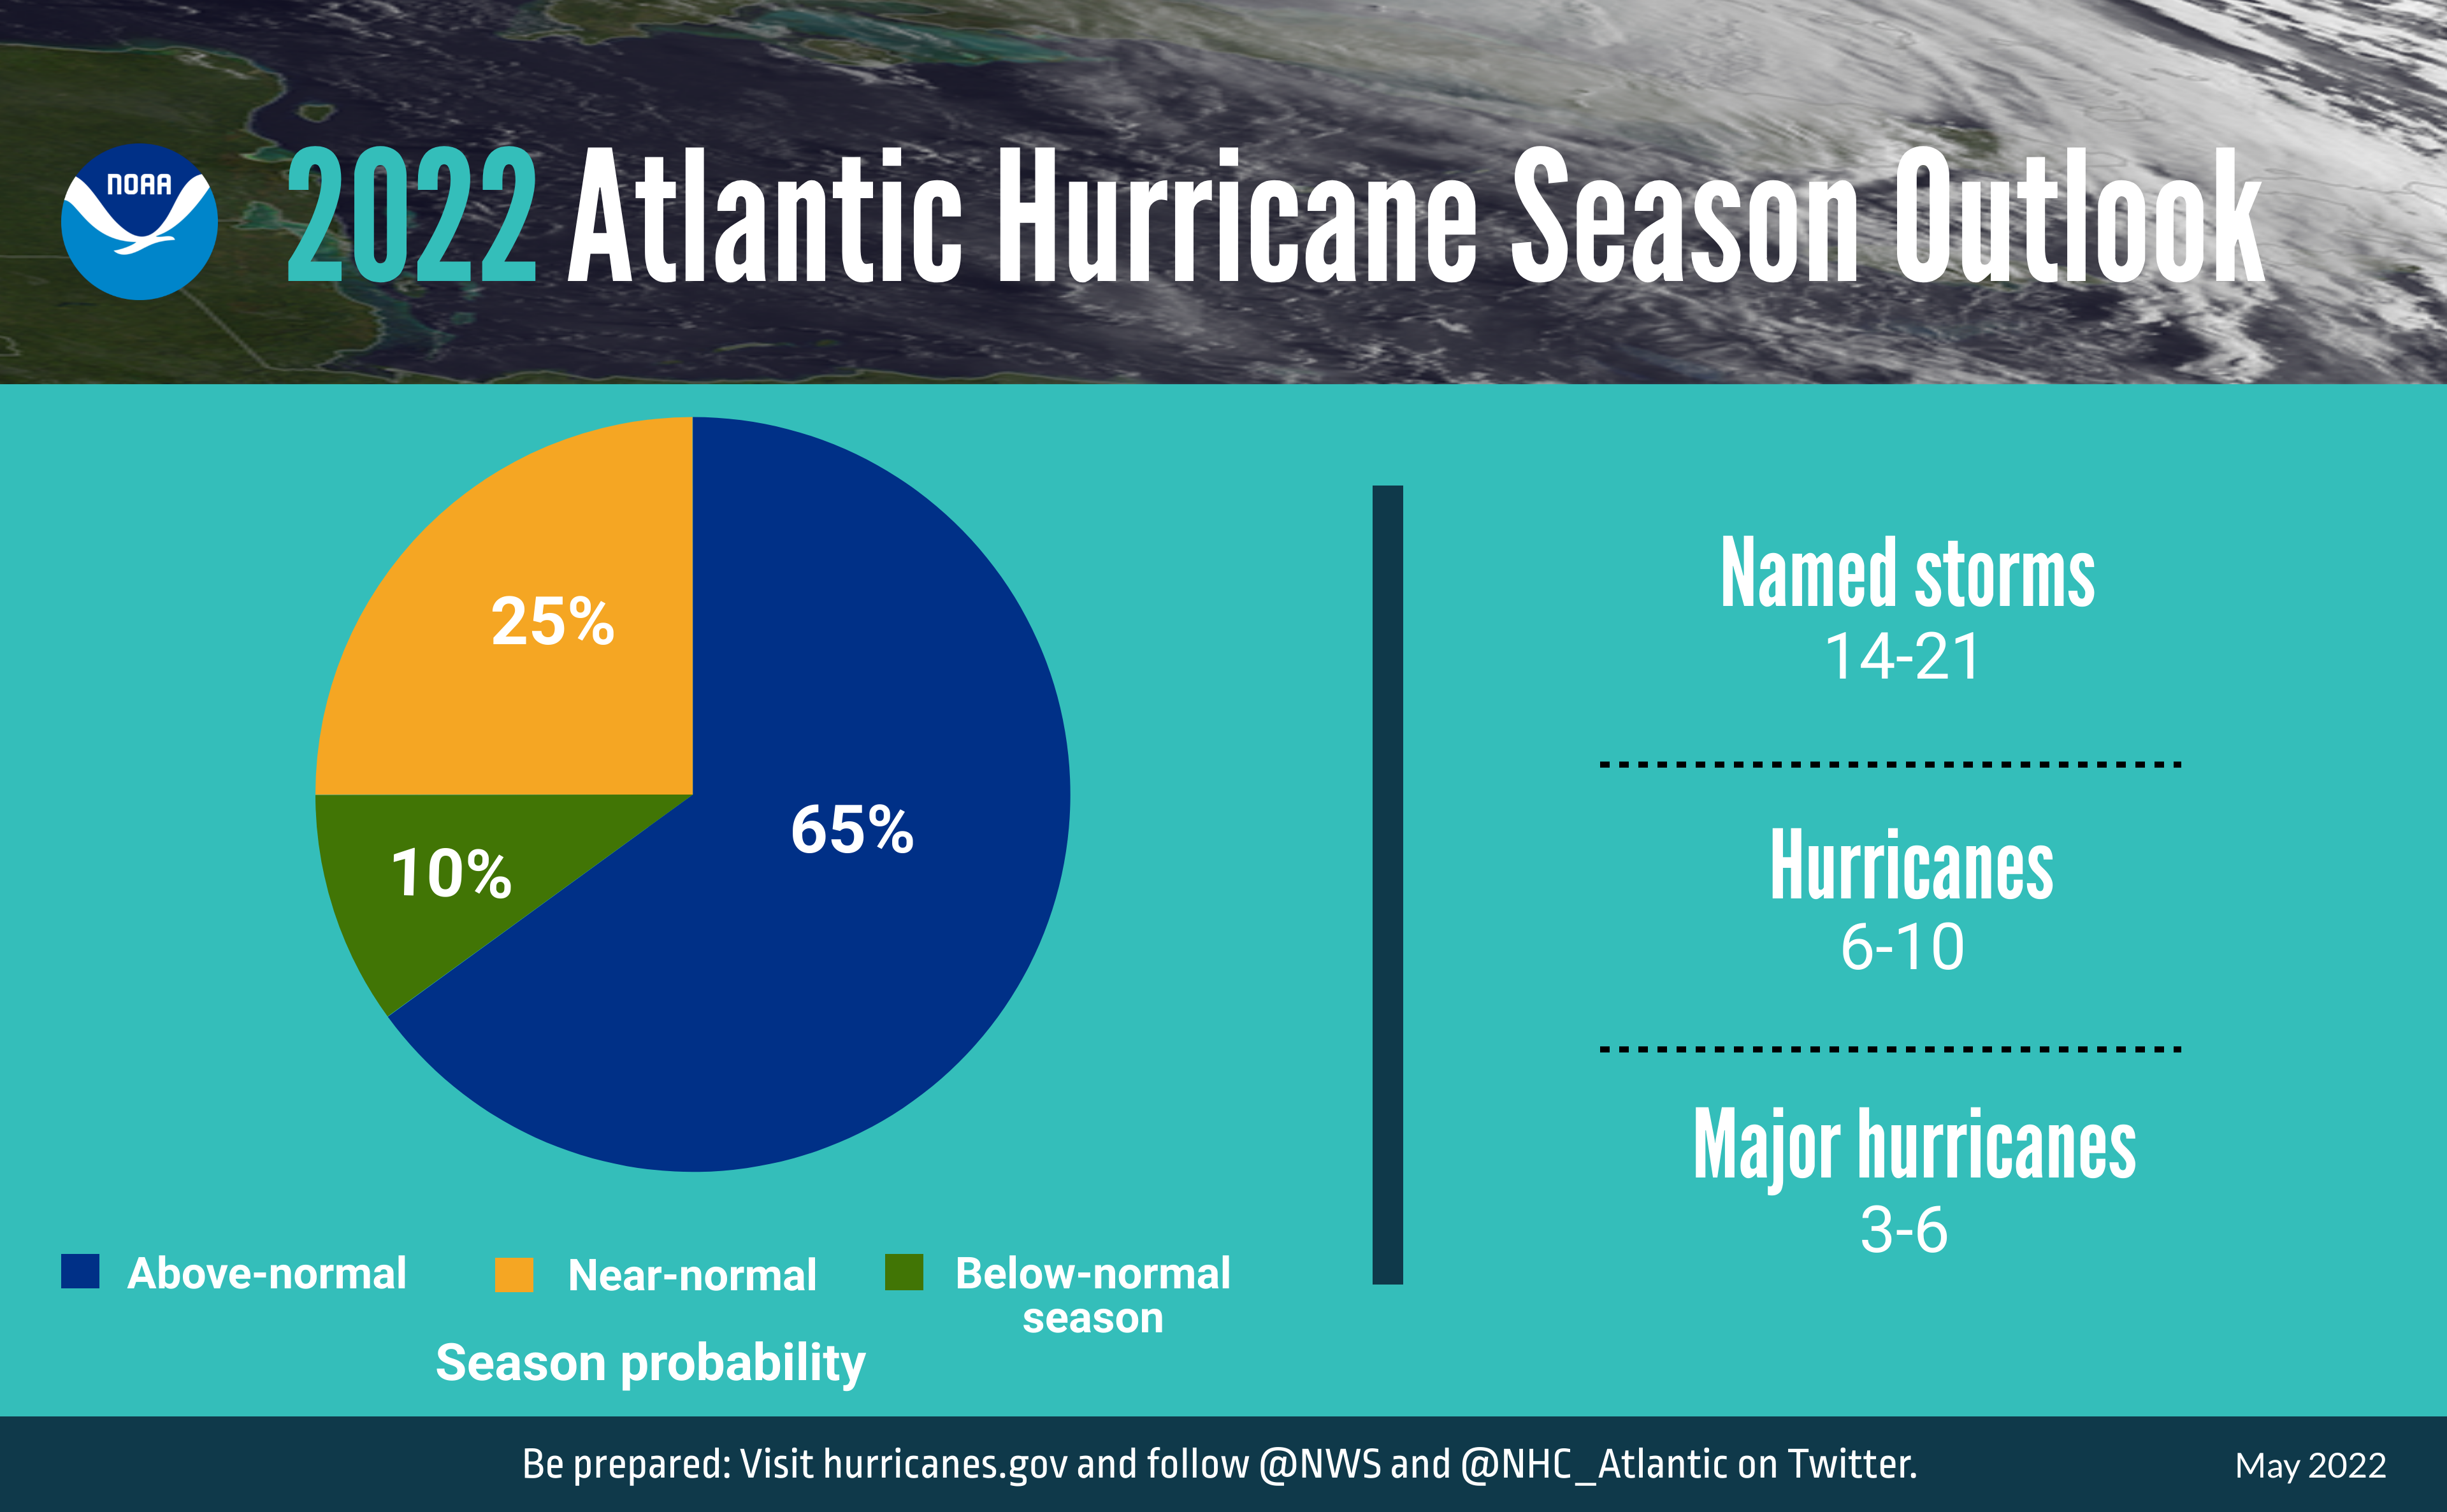 Overall predictions for the 2022 Atlantic hurricane season courtesy of NOAA National Weather Service (NWS)